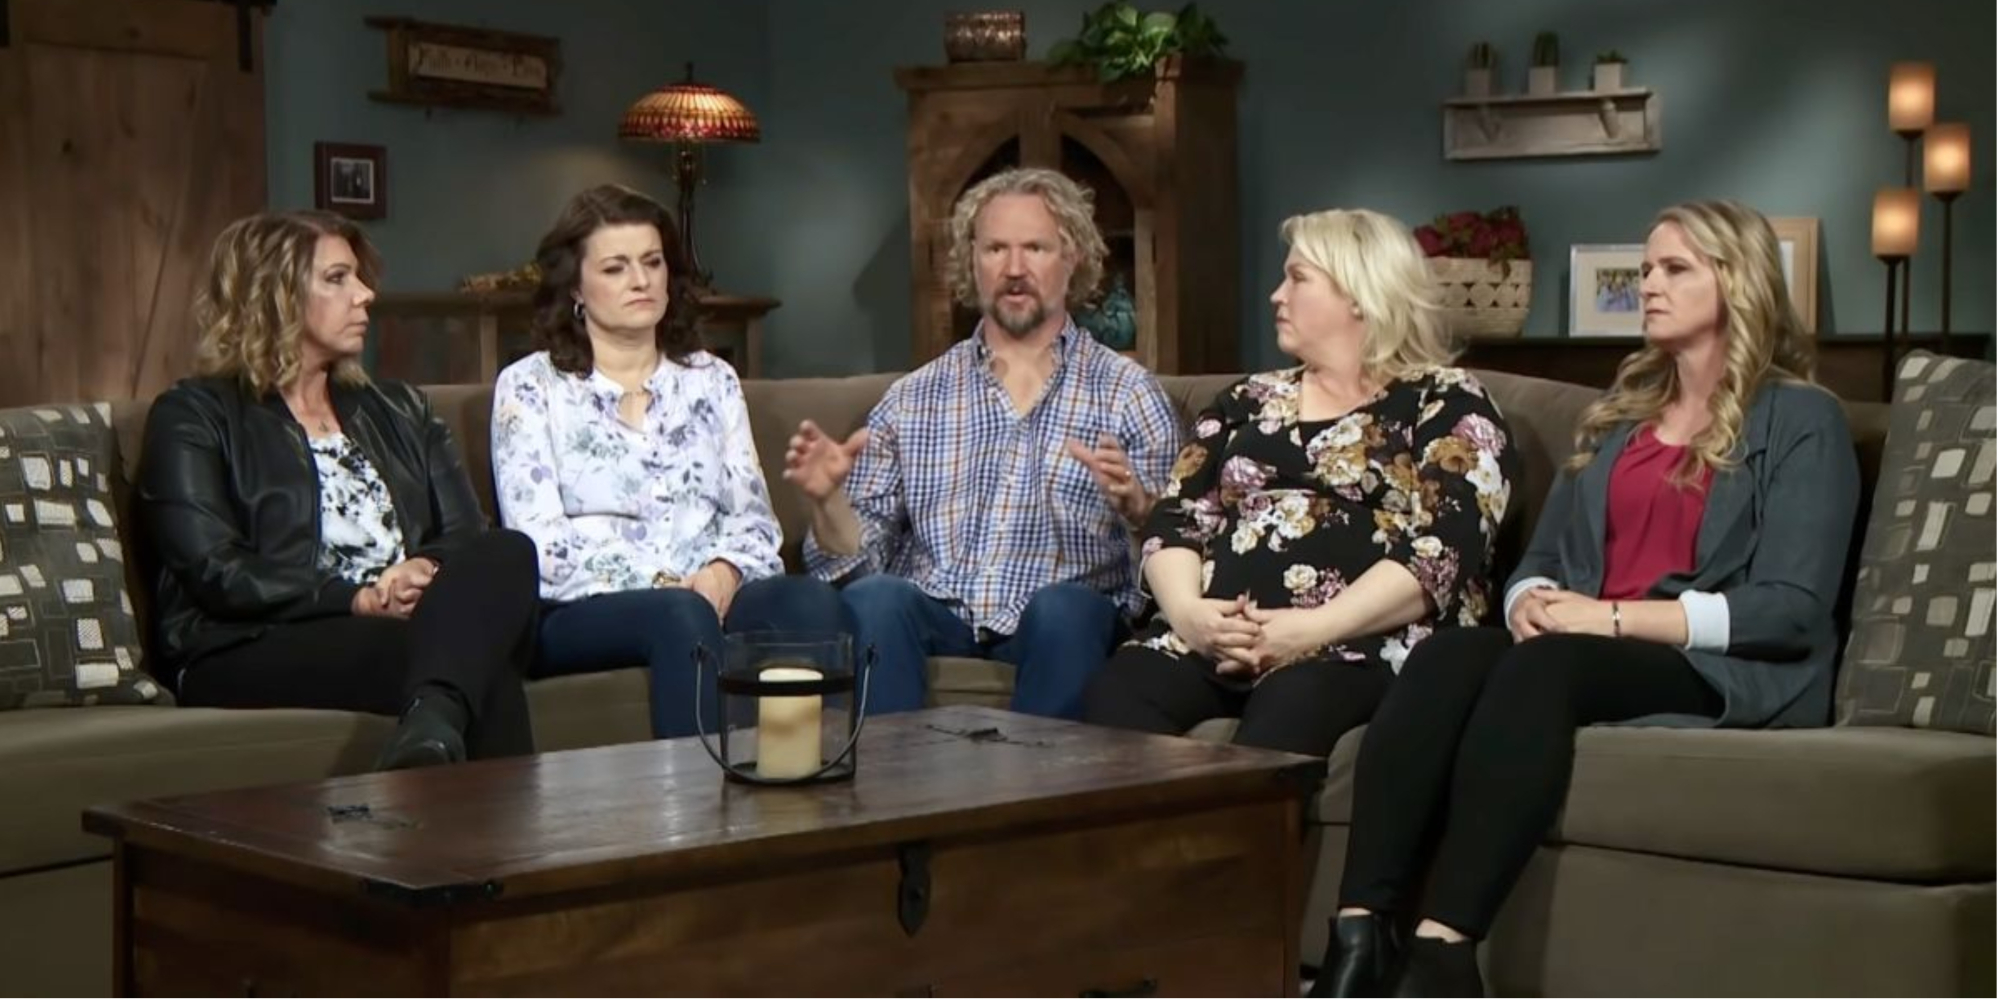 'Sister Wives' cast includes Kody Brown and wives Meri, Robyn, Janelle and ex-Christine.